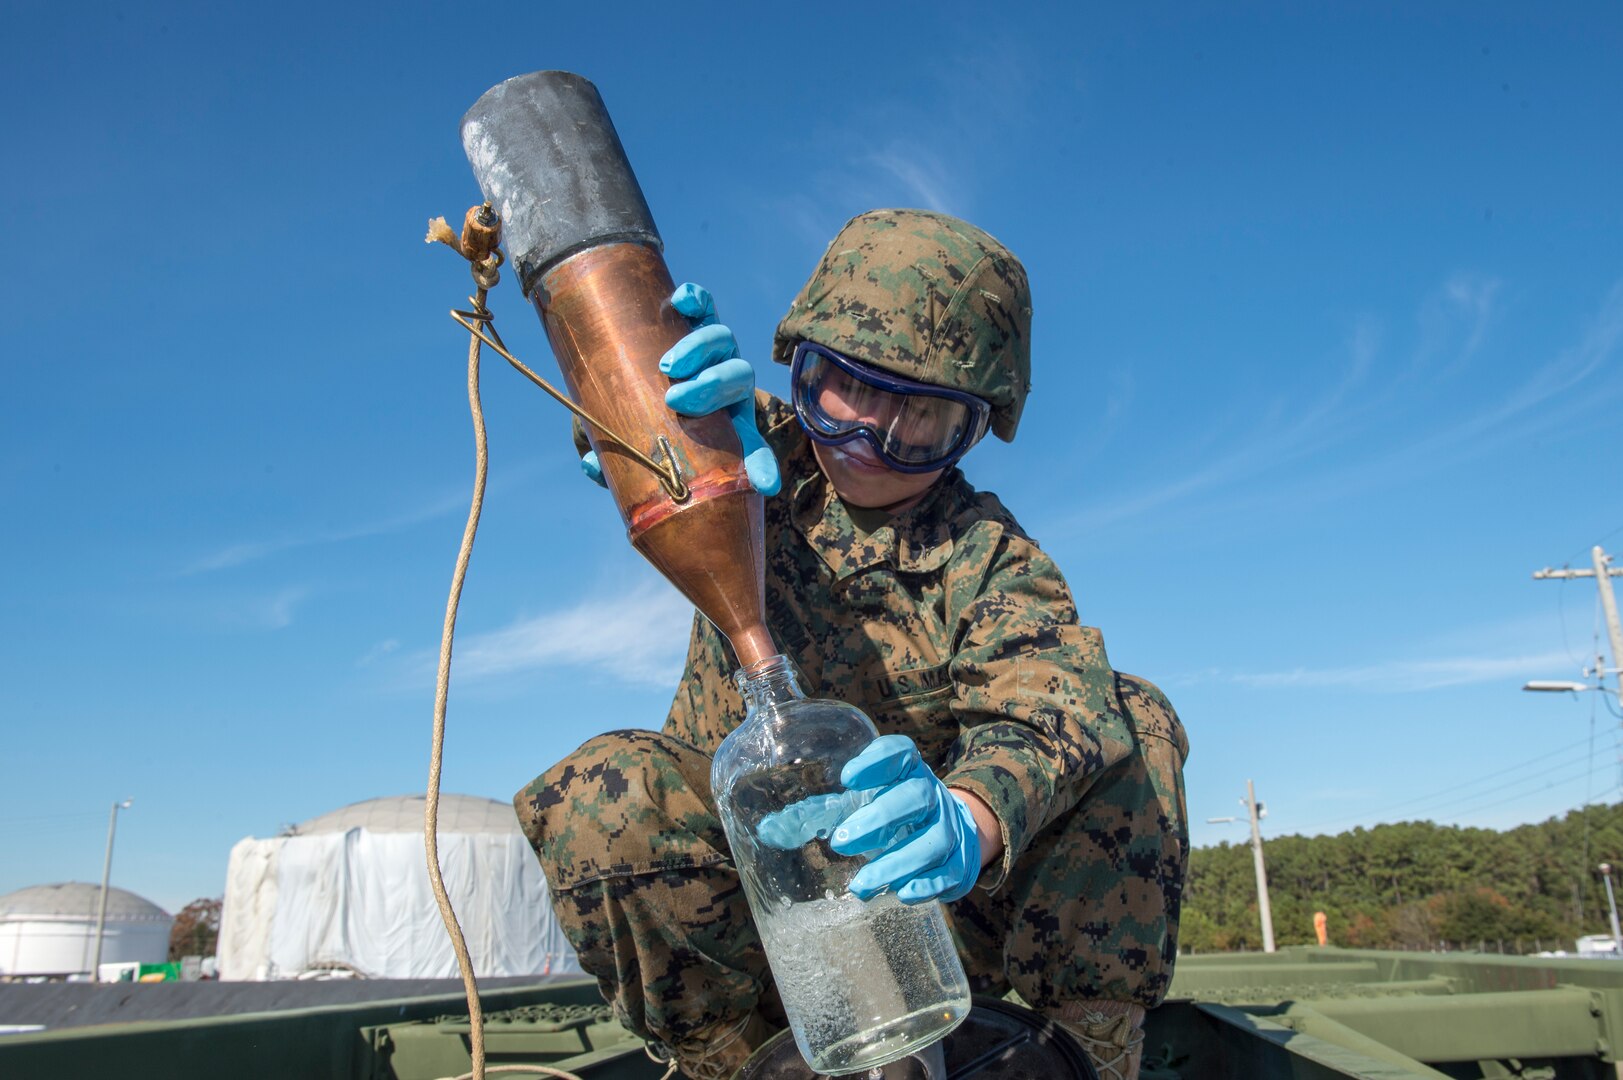 Marine Lance Cpl. Abril Garcia, a bulk fuel specialist from Marine Wing Support Squadron 172, Okinawa, Japan, retrieves a fuel sample during a technical demonstration of the Expeditionary Mobile Fuel Additization Capability at the Charleston Defense Fuel Supply Point Dec. 6, 2018.